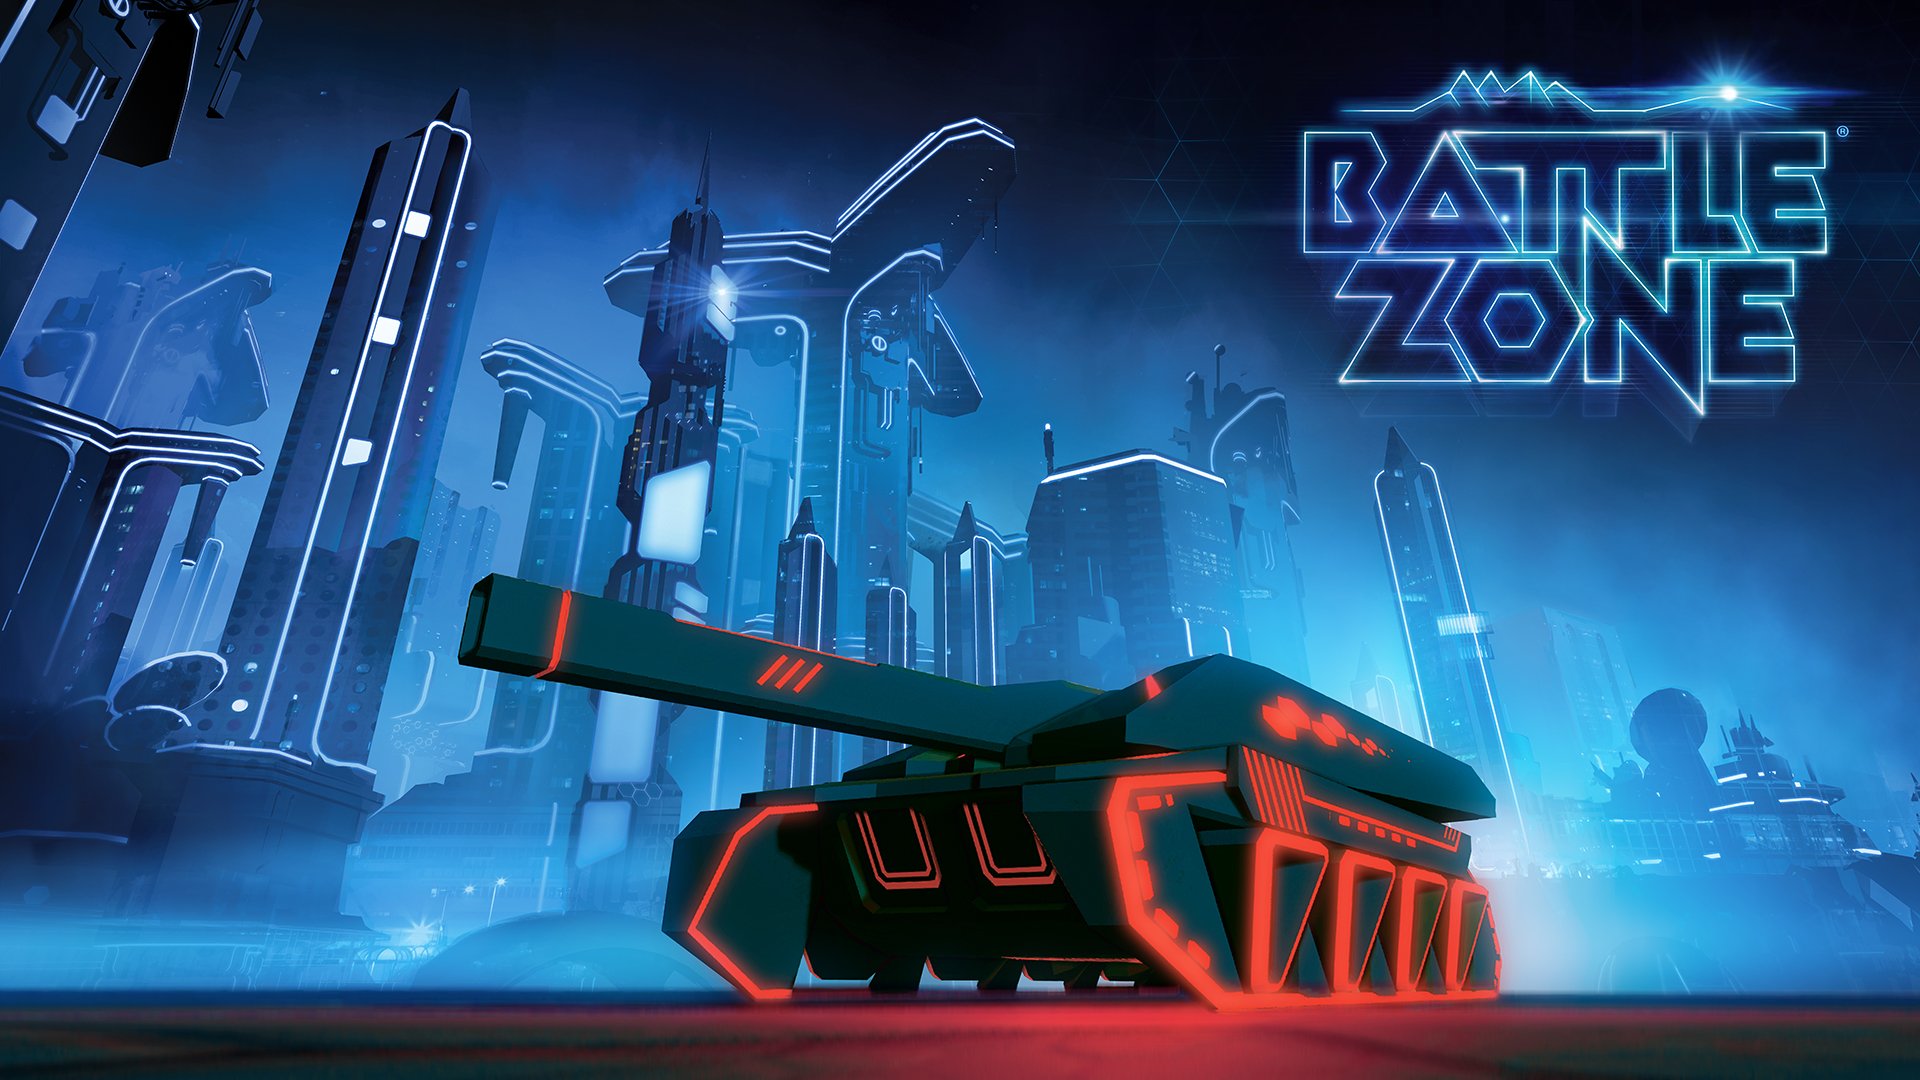 Playstation Vr Exclusive Battlezone Gets New Gameplay Trailer